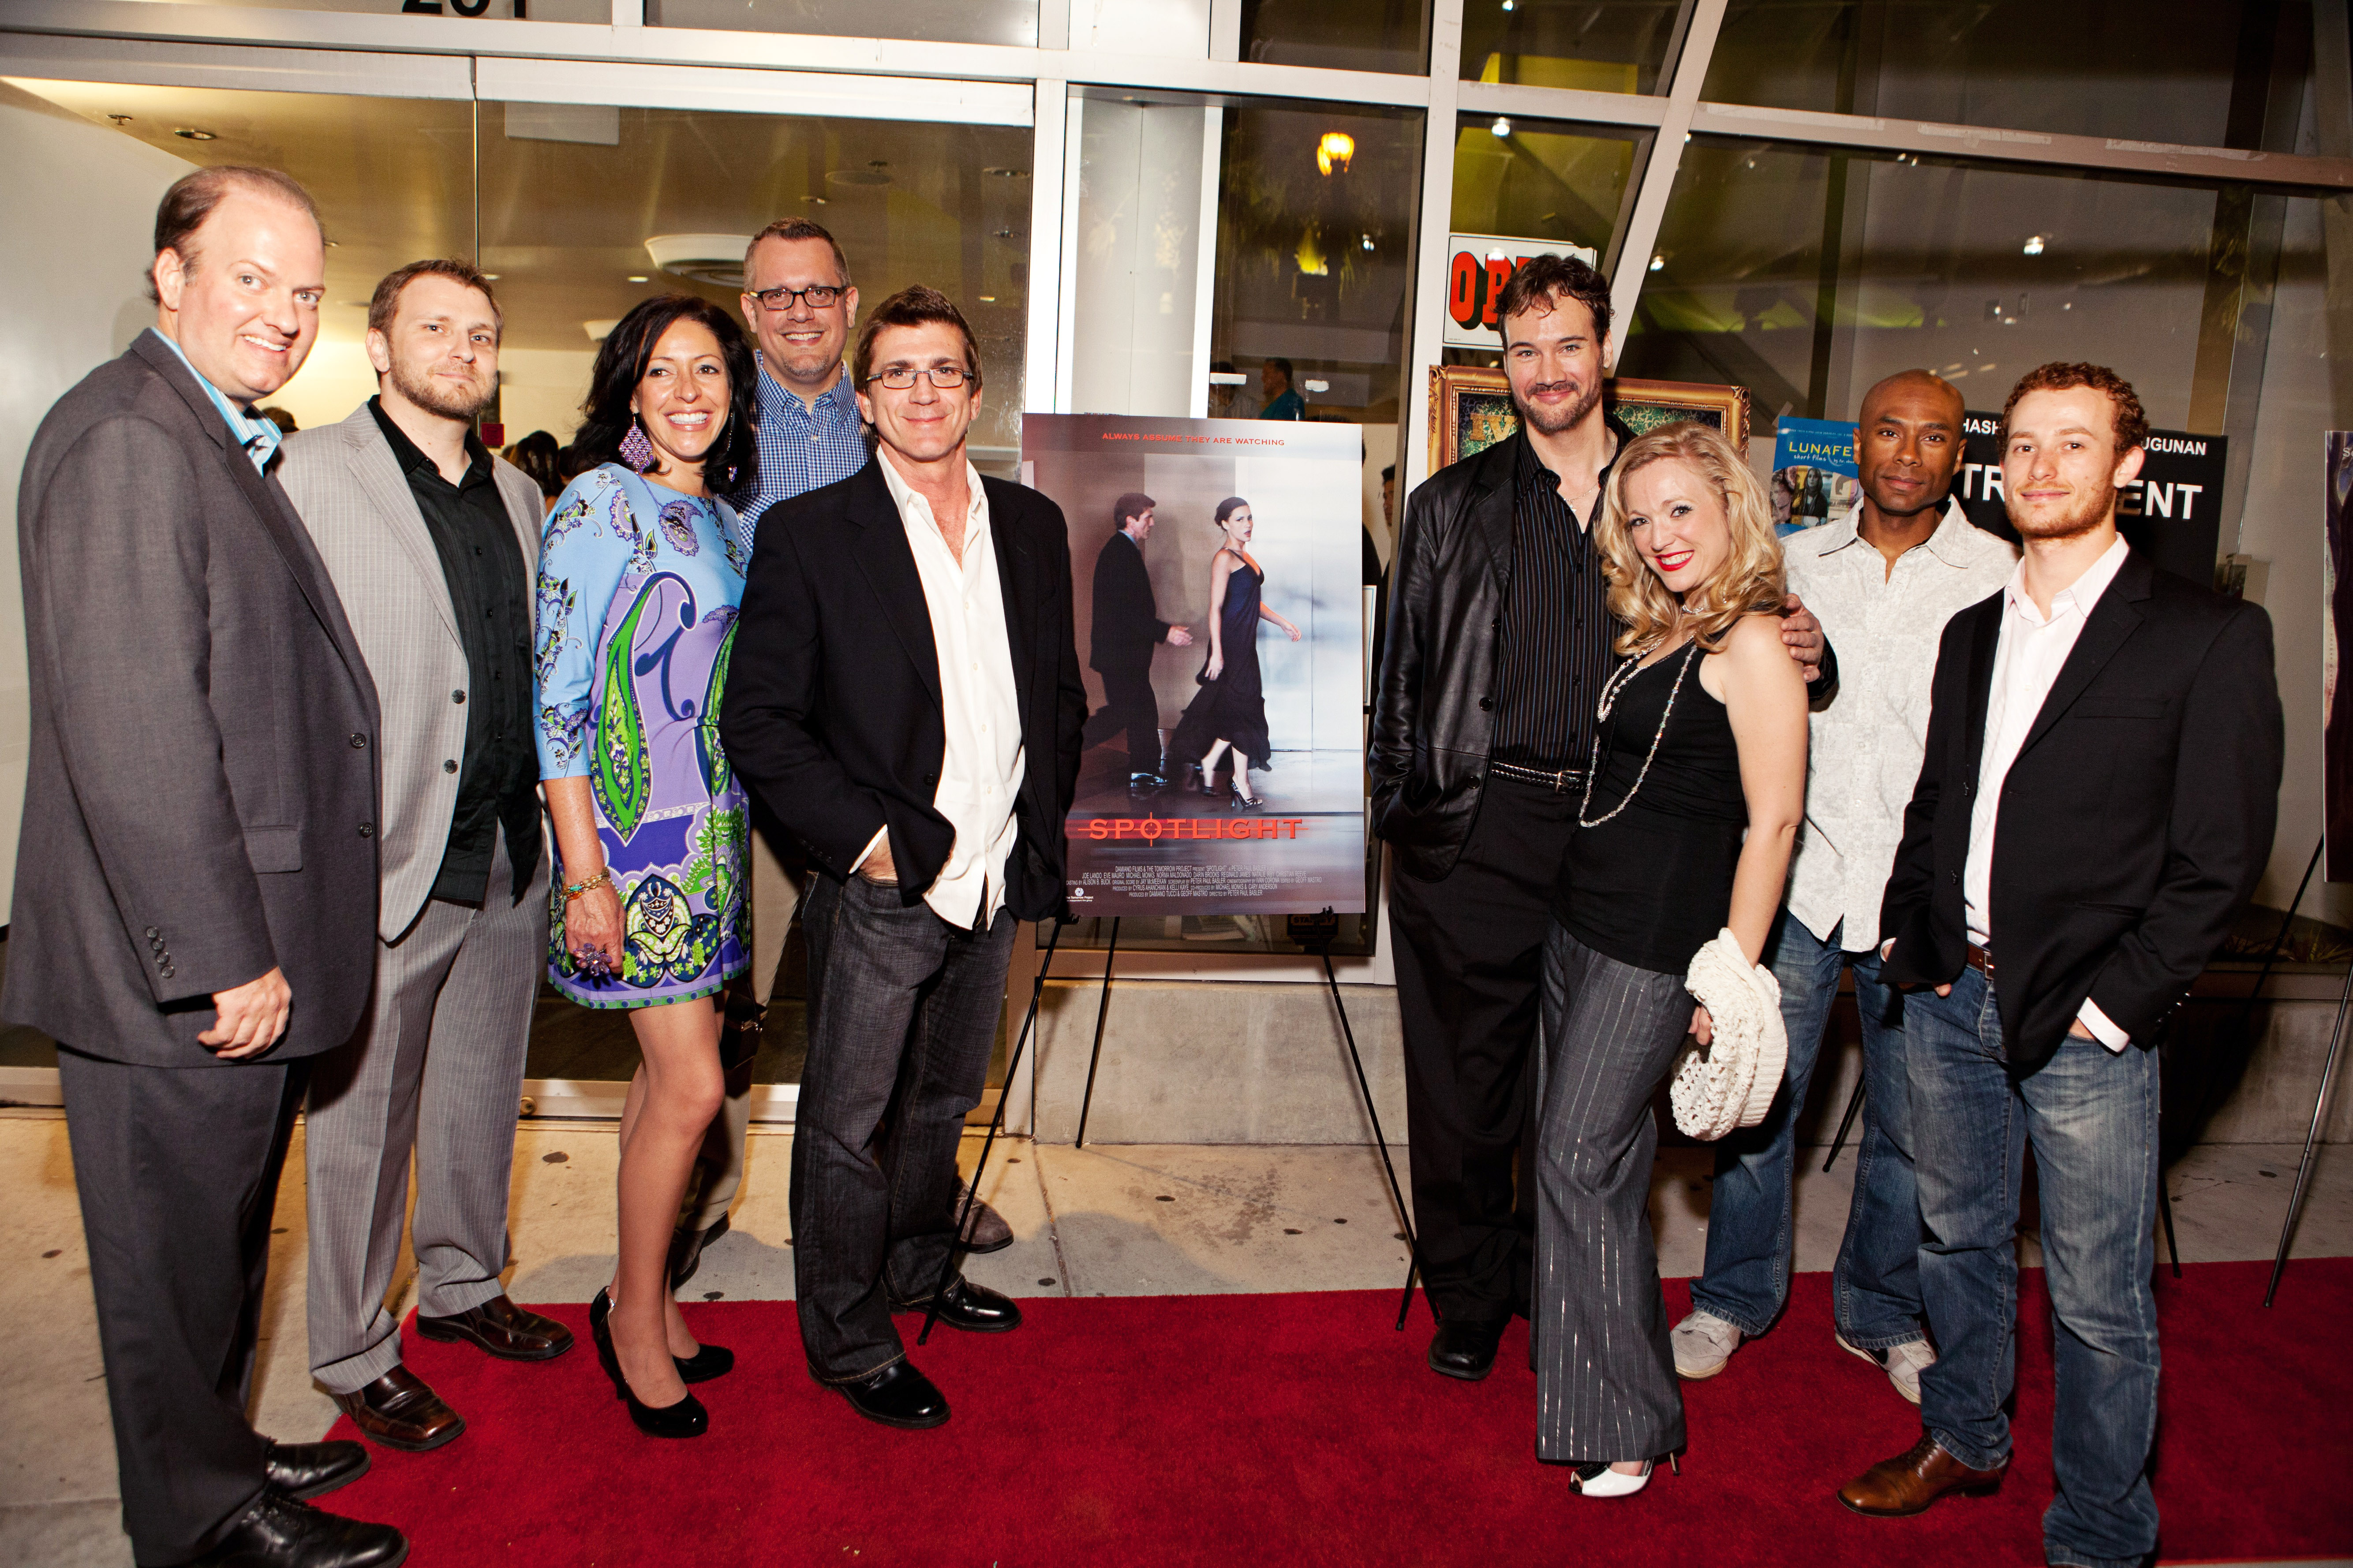 The cast and crew of SPOTLIGHT at the event of ONE APRIL NIGHT OF SHORTS